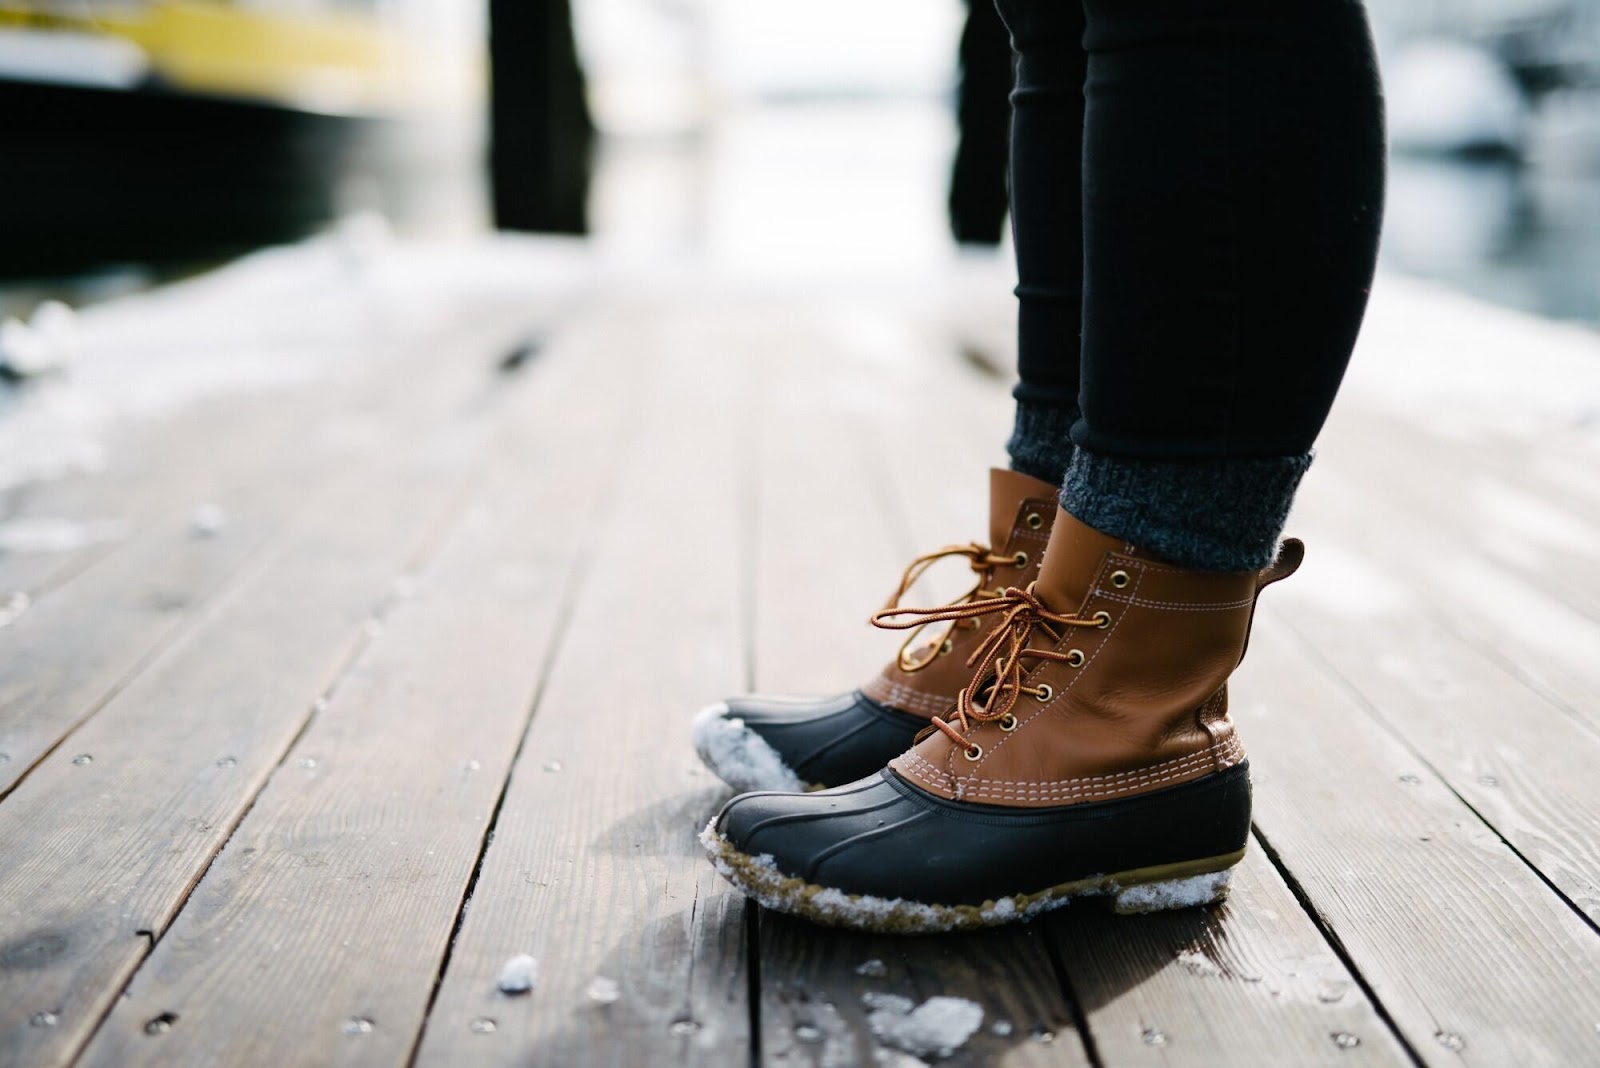 How to Choose the Best Women's Work Boots